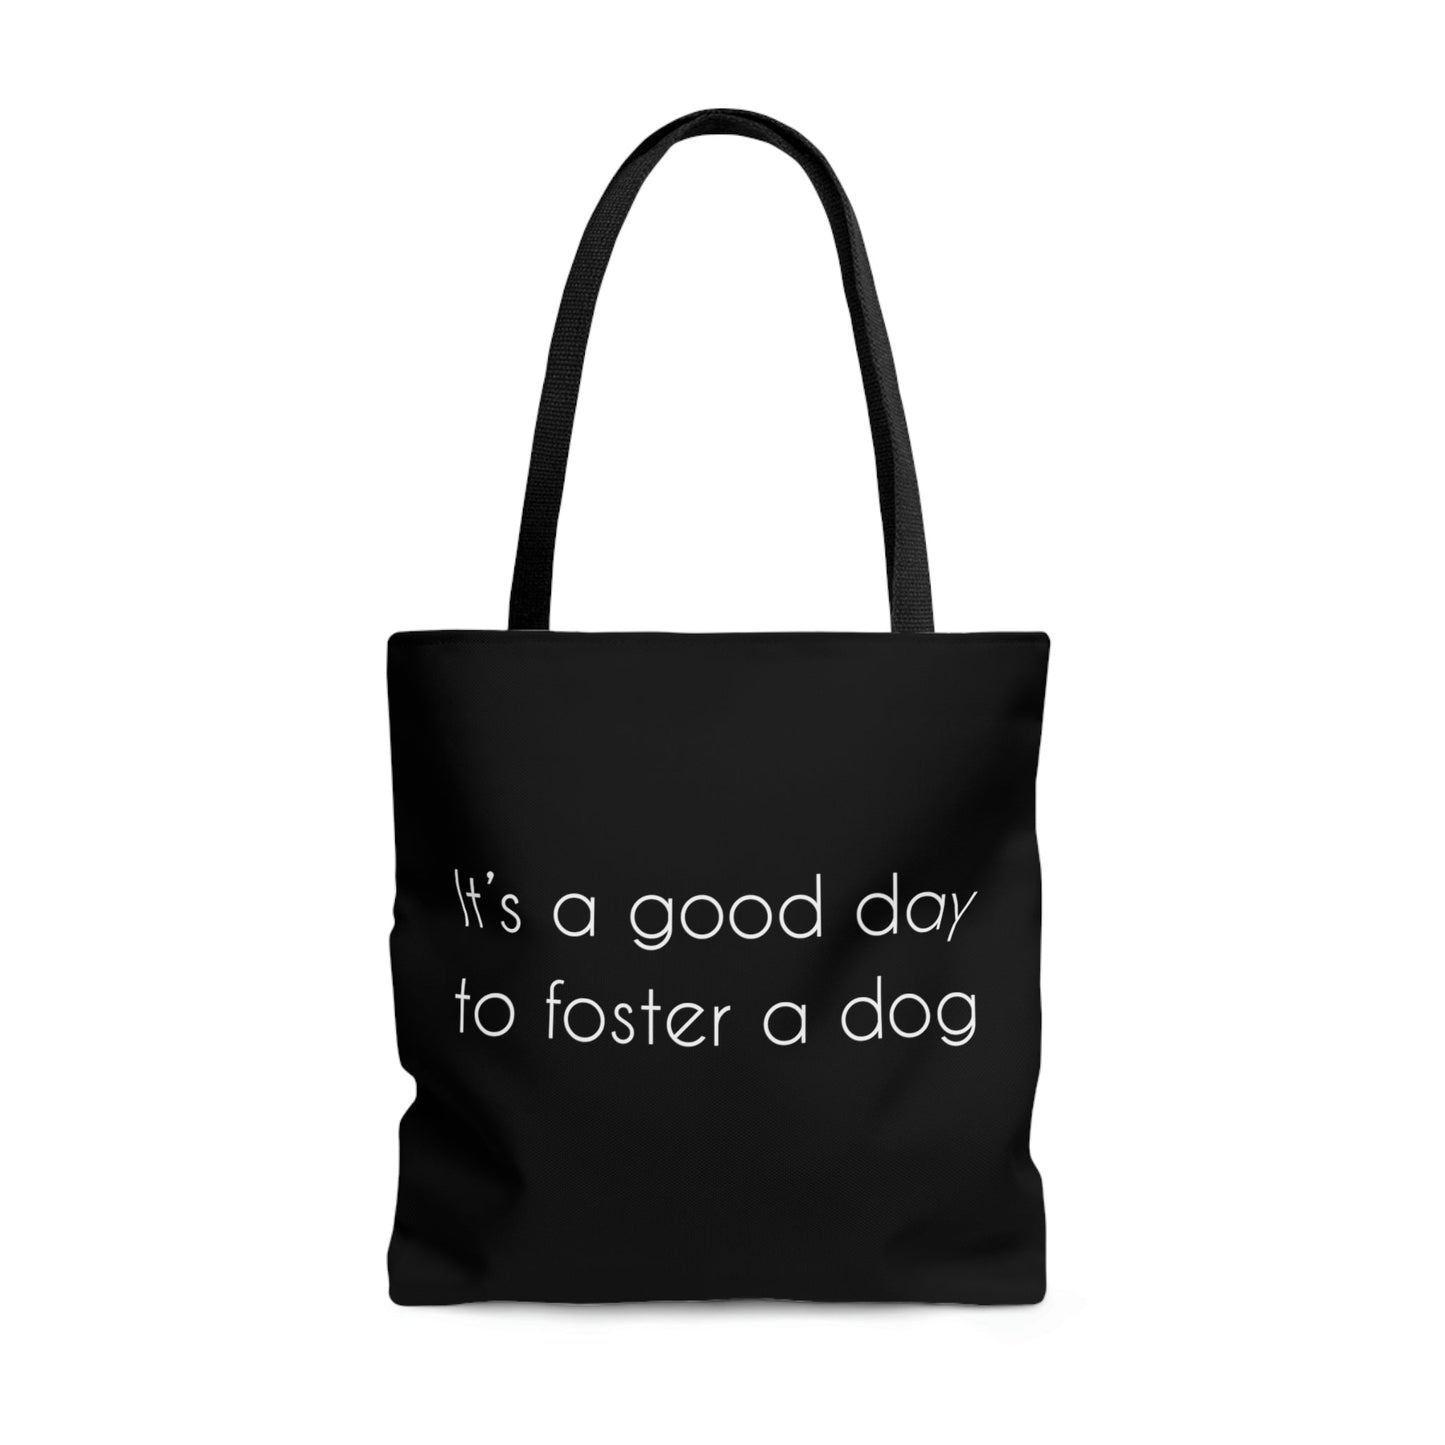 It's A Good Day To Foster A Dog | Tote Bag - Detezi Designs-20872928807333941937